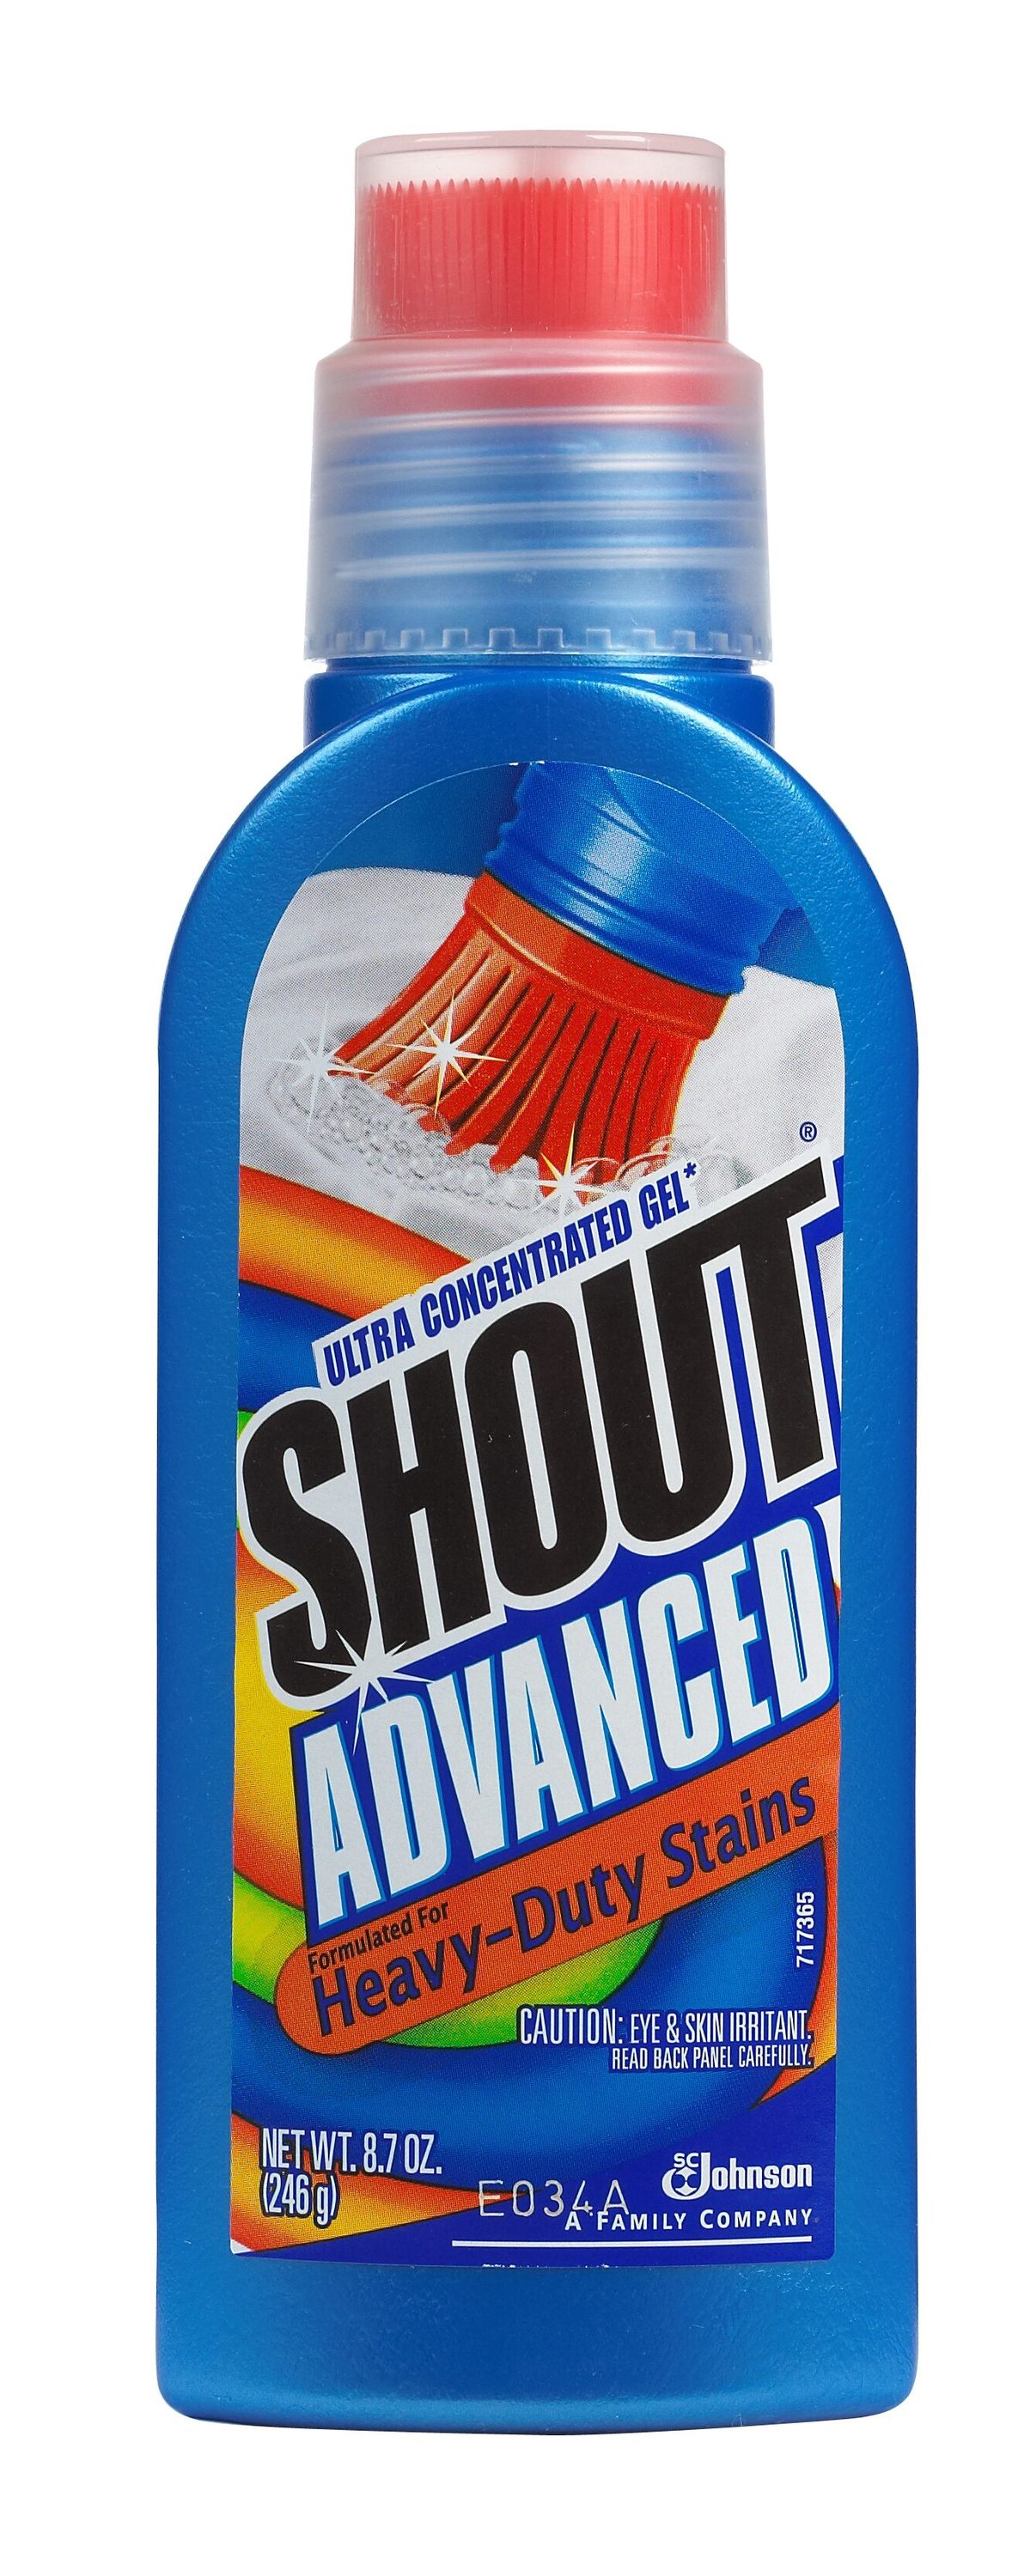 Shout Advanced Action Gel Stain Remover Refill, Stain Remover & Softener